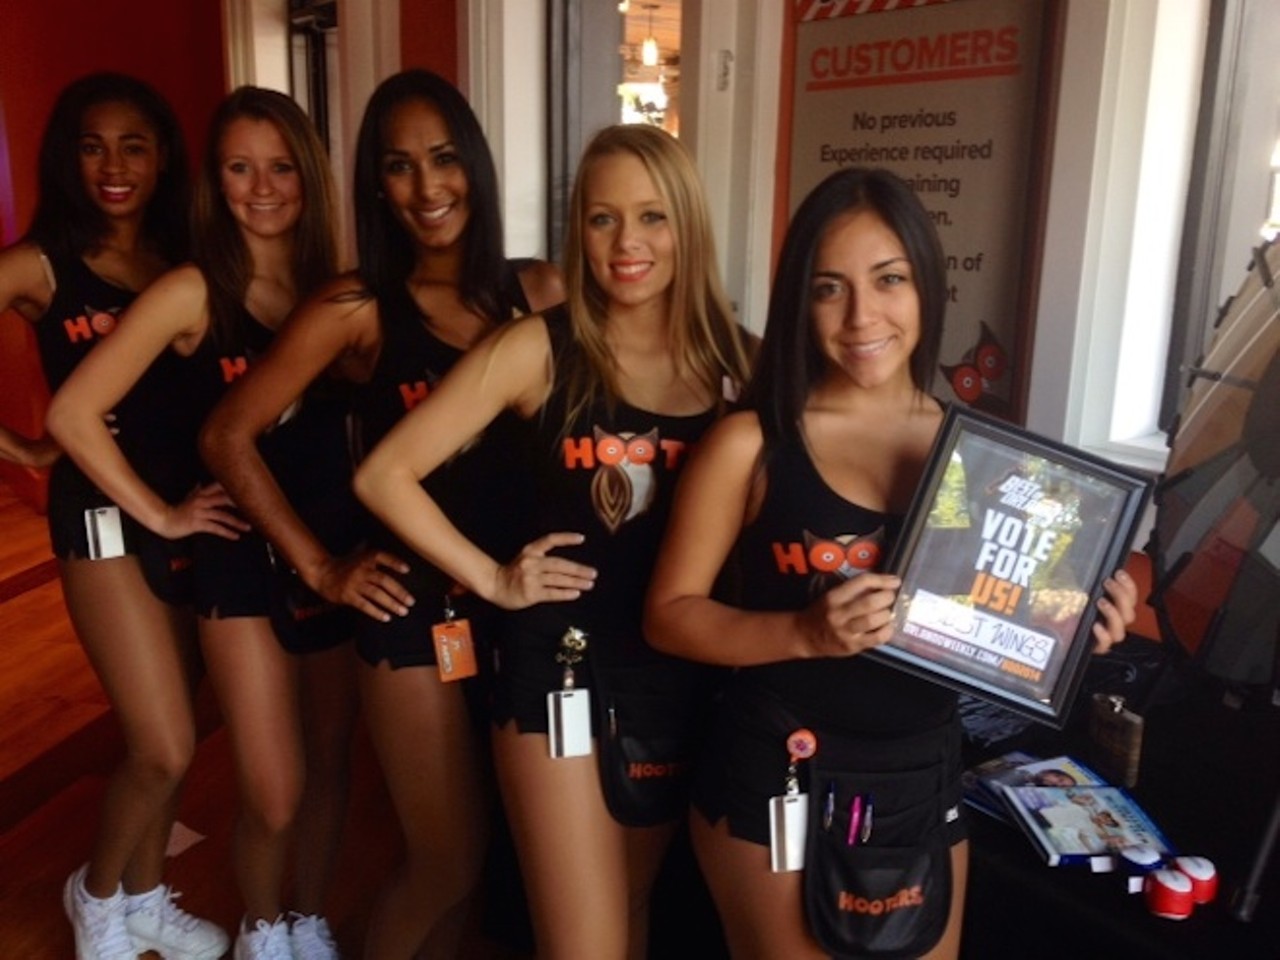 Hot Shots: Best of Orlando Voting Party @ Hooters on I-Drive